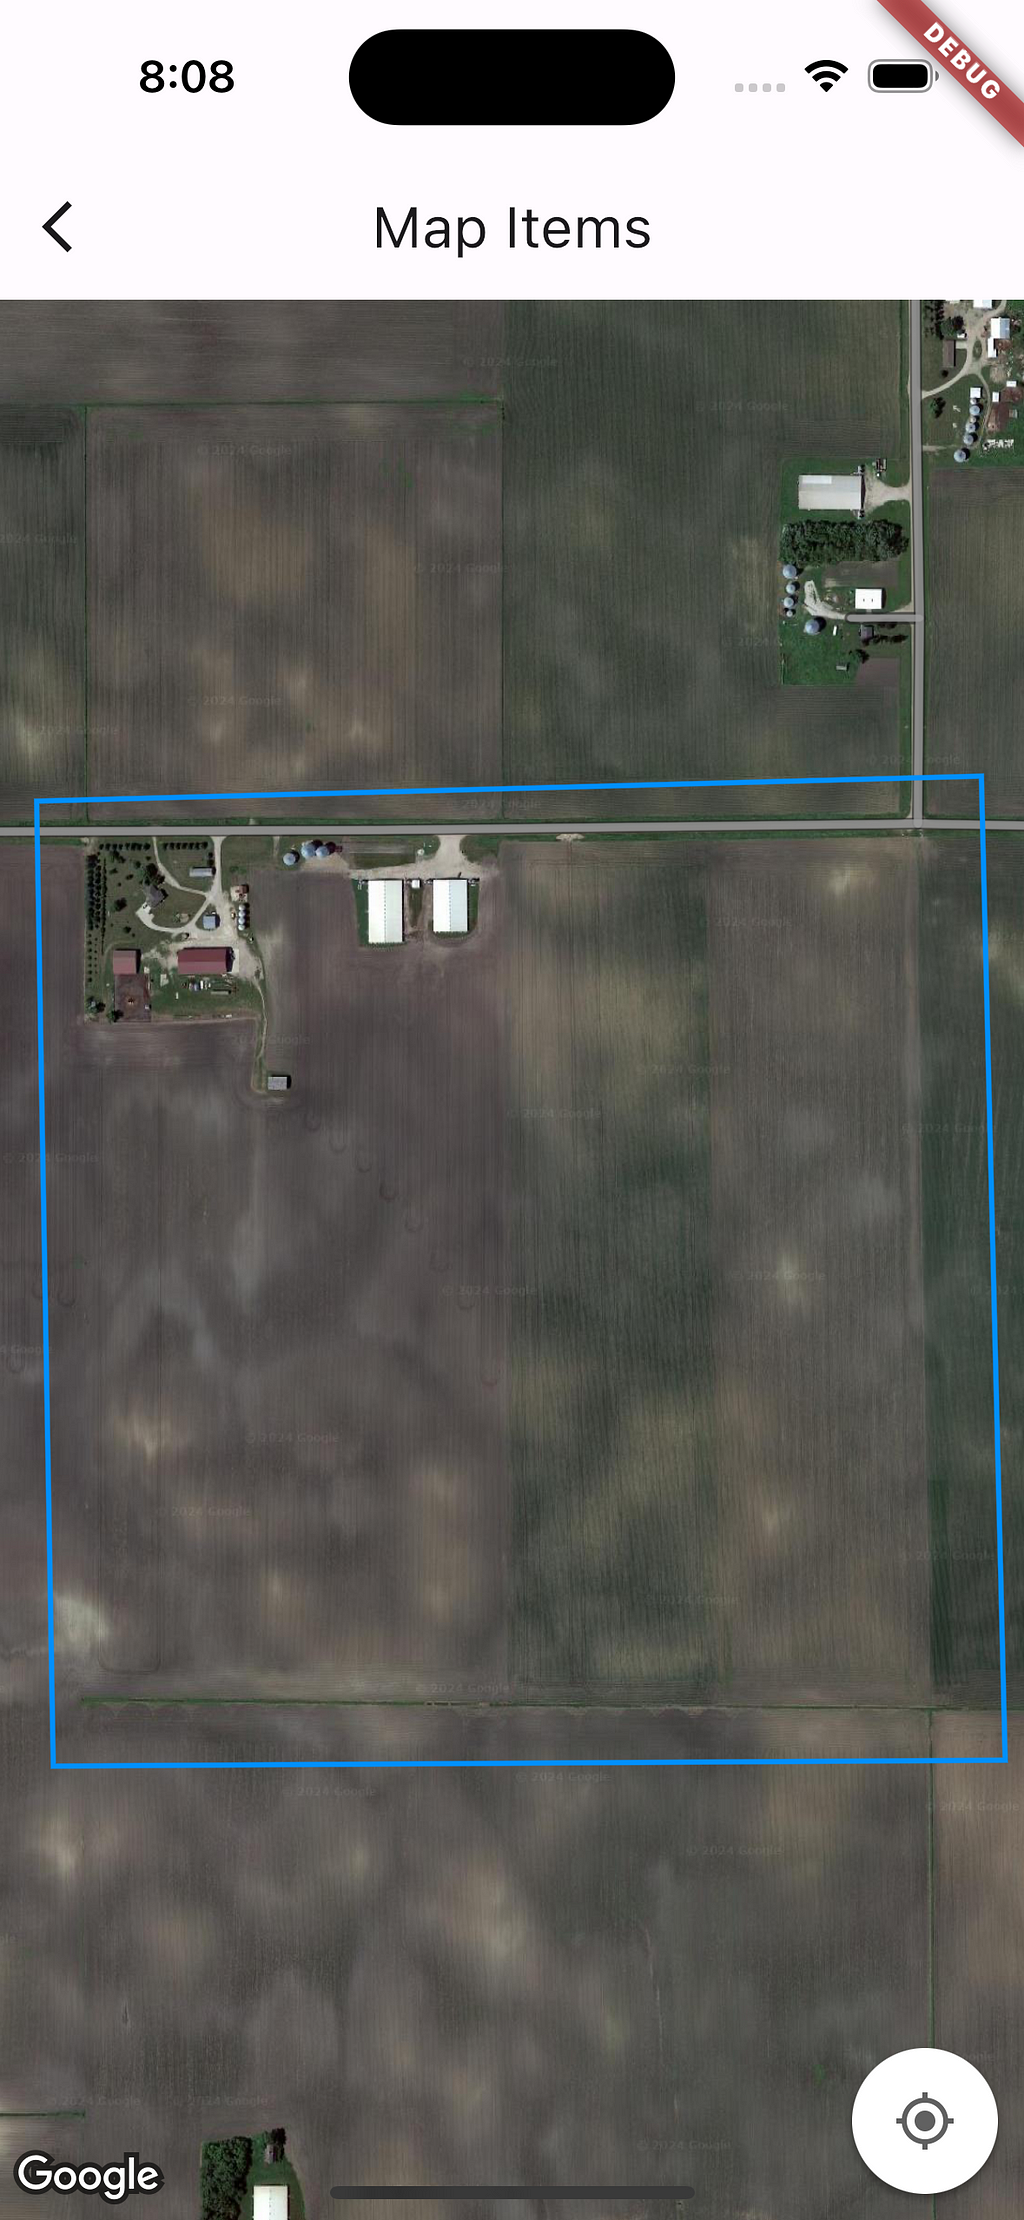 A screenshot of a map open on a smartphone. The map is showing satellite image of a farm in Northern part of USA. A line is drawn on the map. The colour of the line is sky blue.